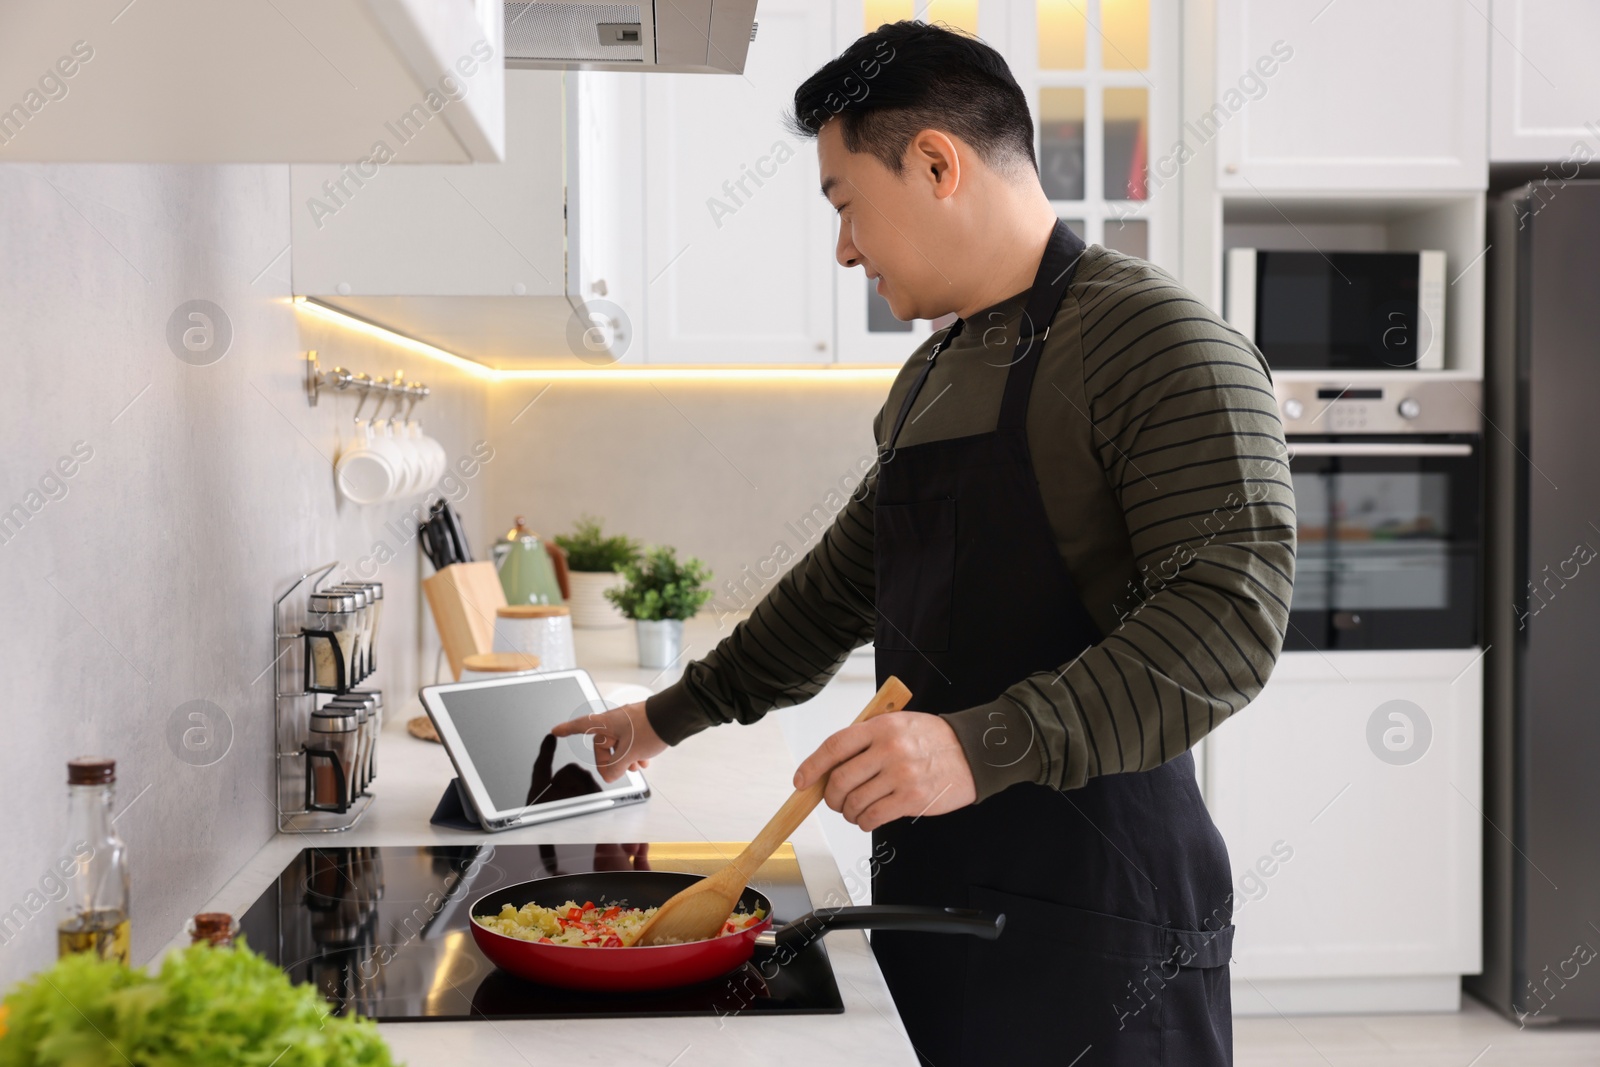 Photo of Man using tablet while cooking in kitchen